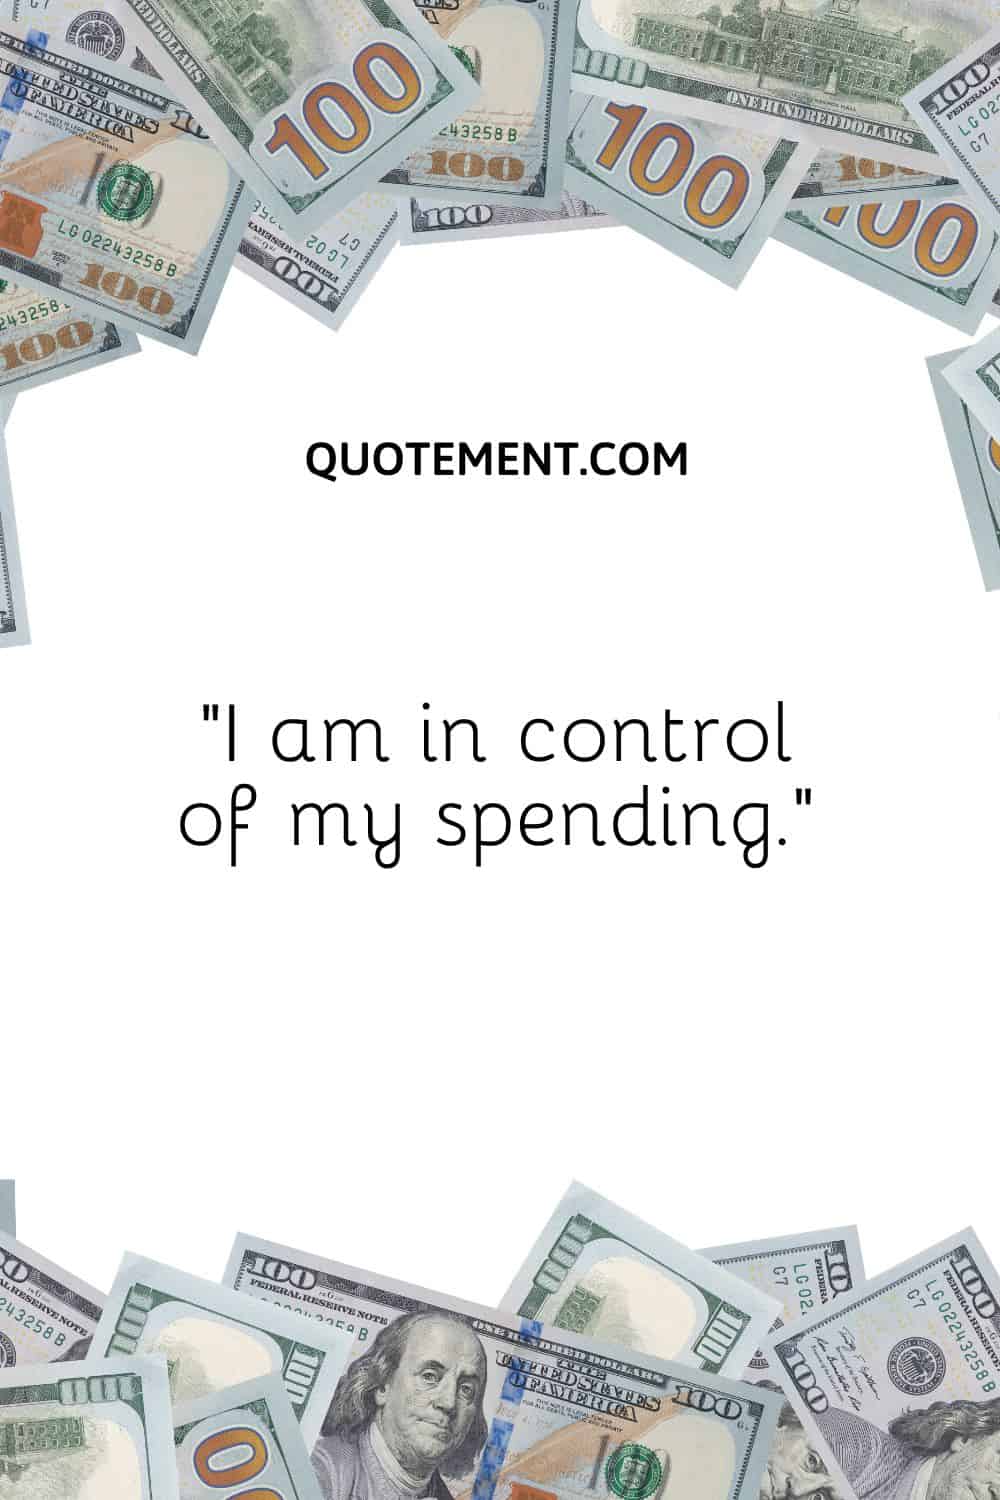 “I am in control of my spending.”